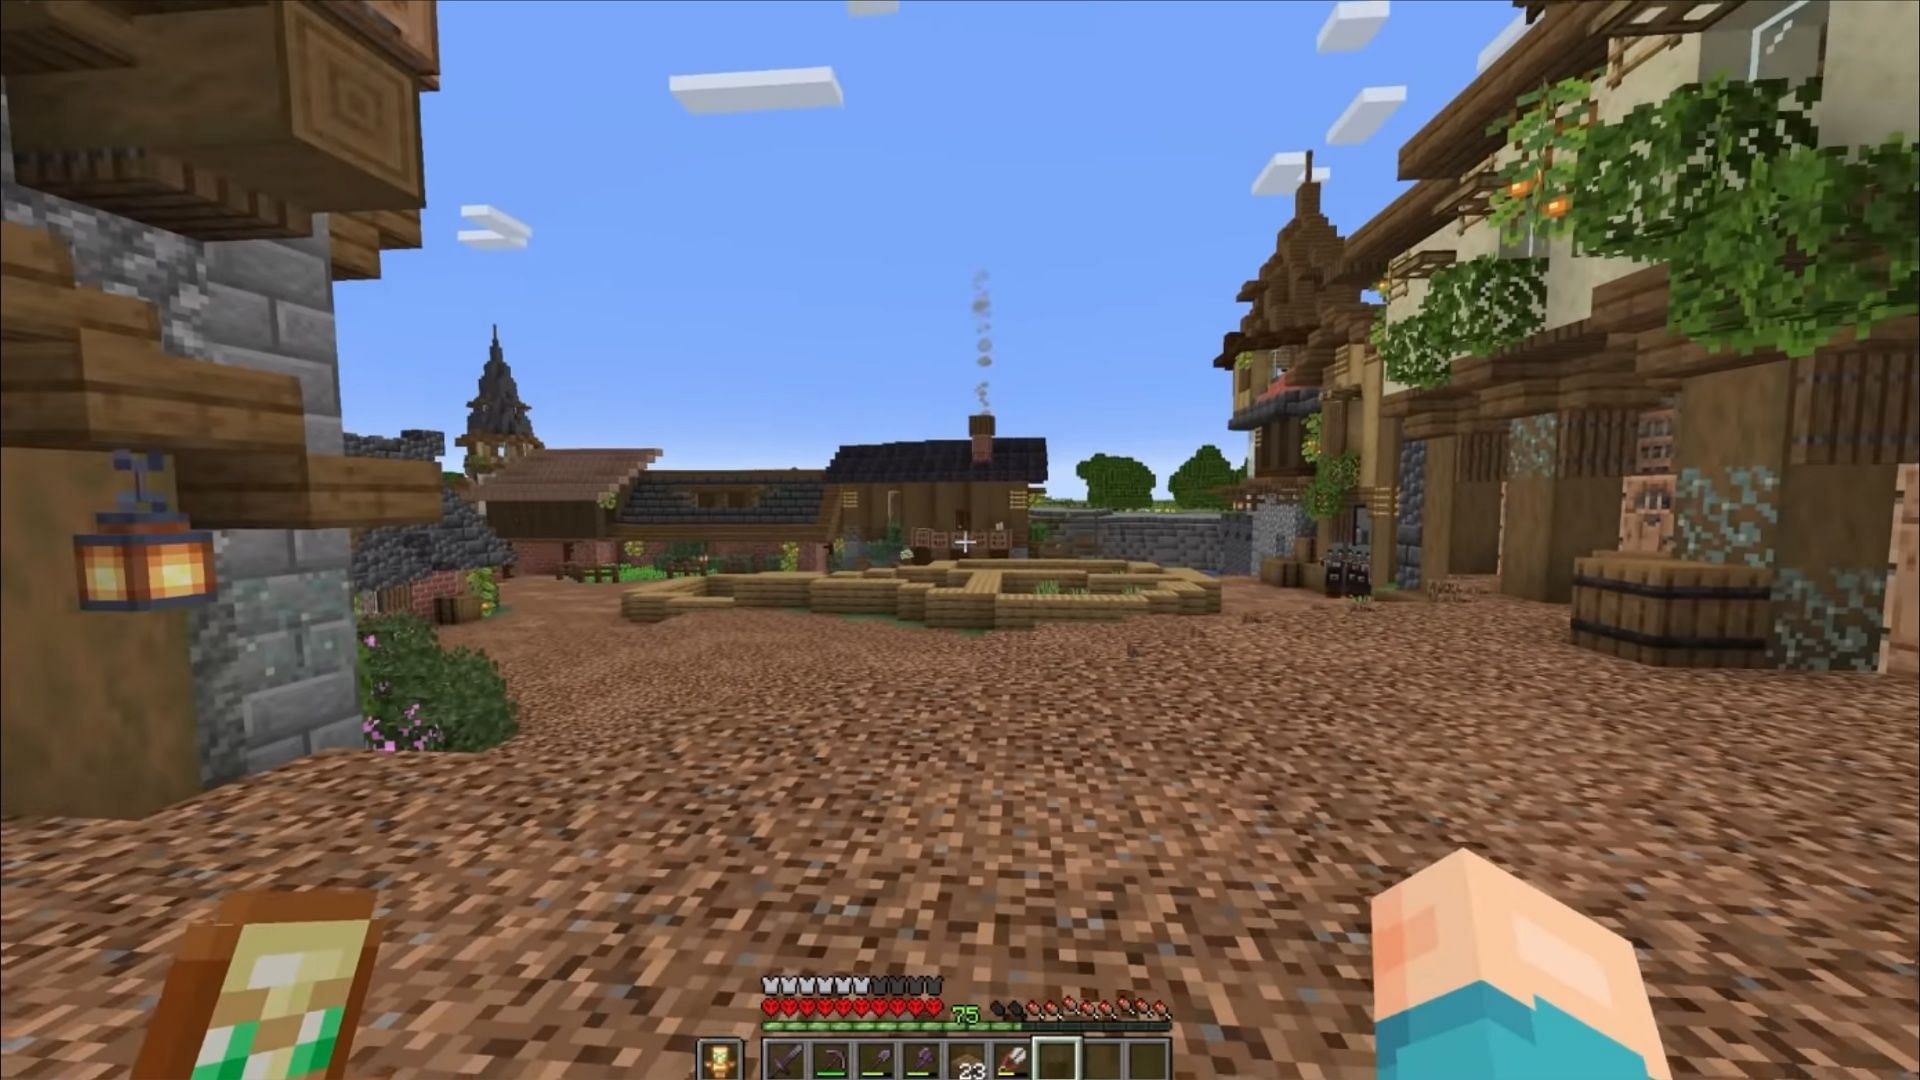 What village ideas should you consider in 2023 for Minecraft?